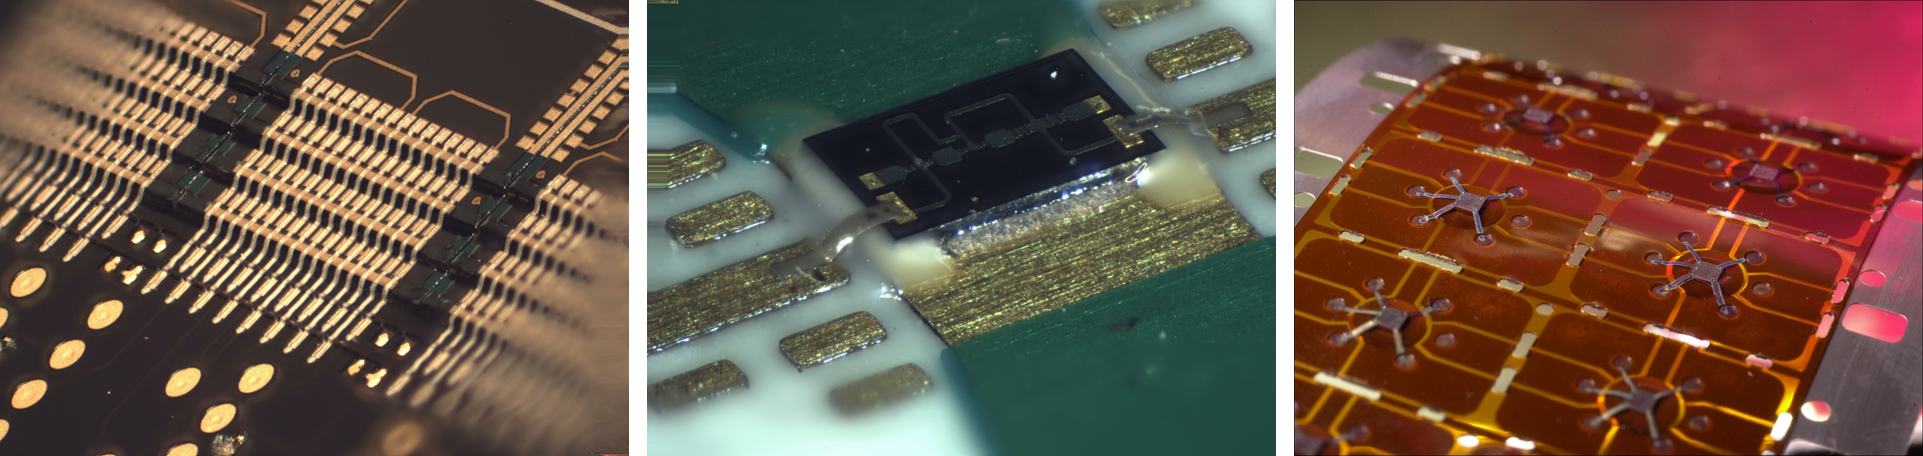 Semiconductor packaging examples showing 3D Interconnects for 3D stacked die (left), mmWave (center), and flex circuit (right).